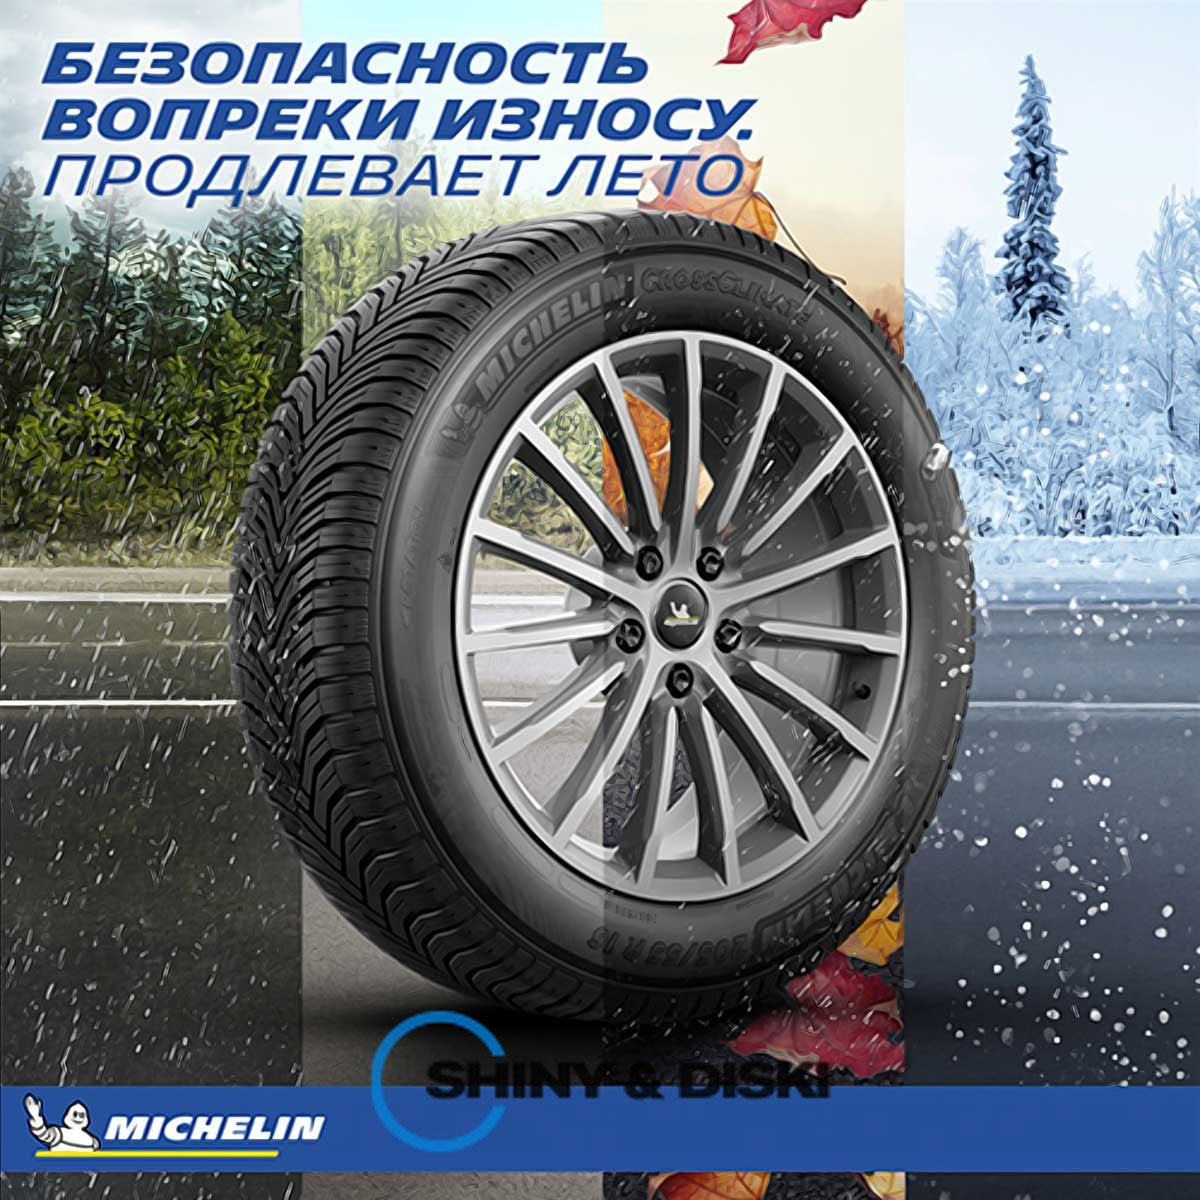 покрышки michelin cross climate+ 195/65 r15 95v xl